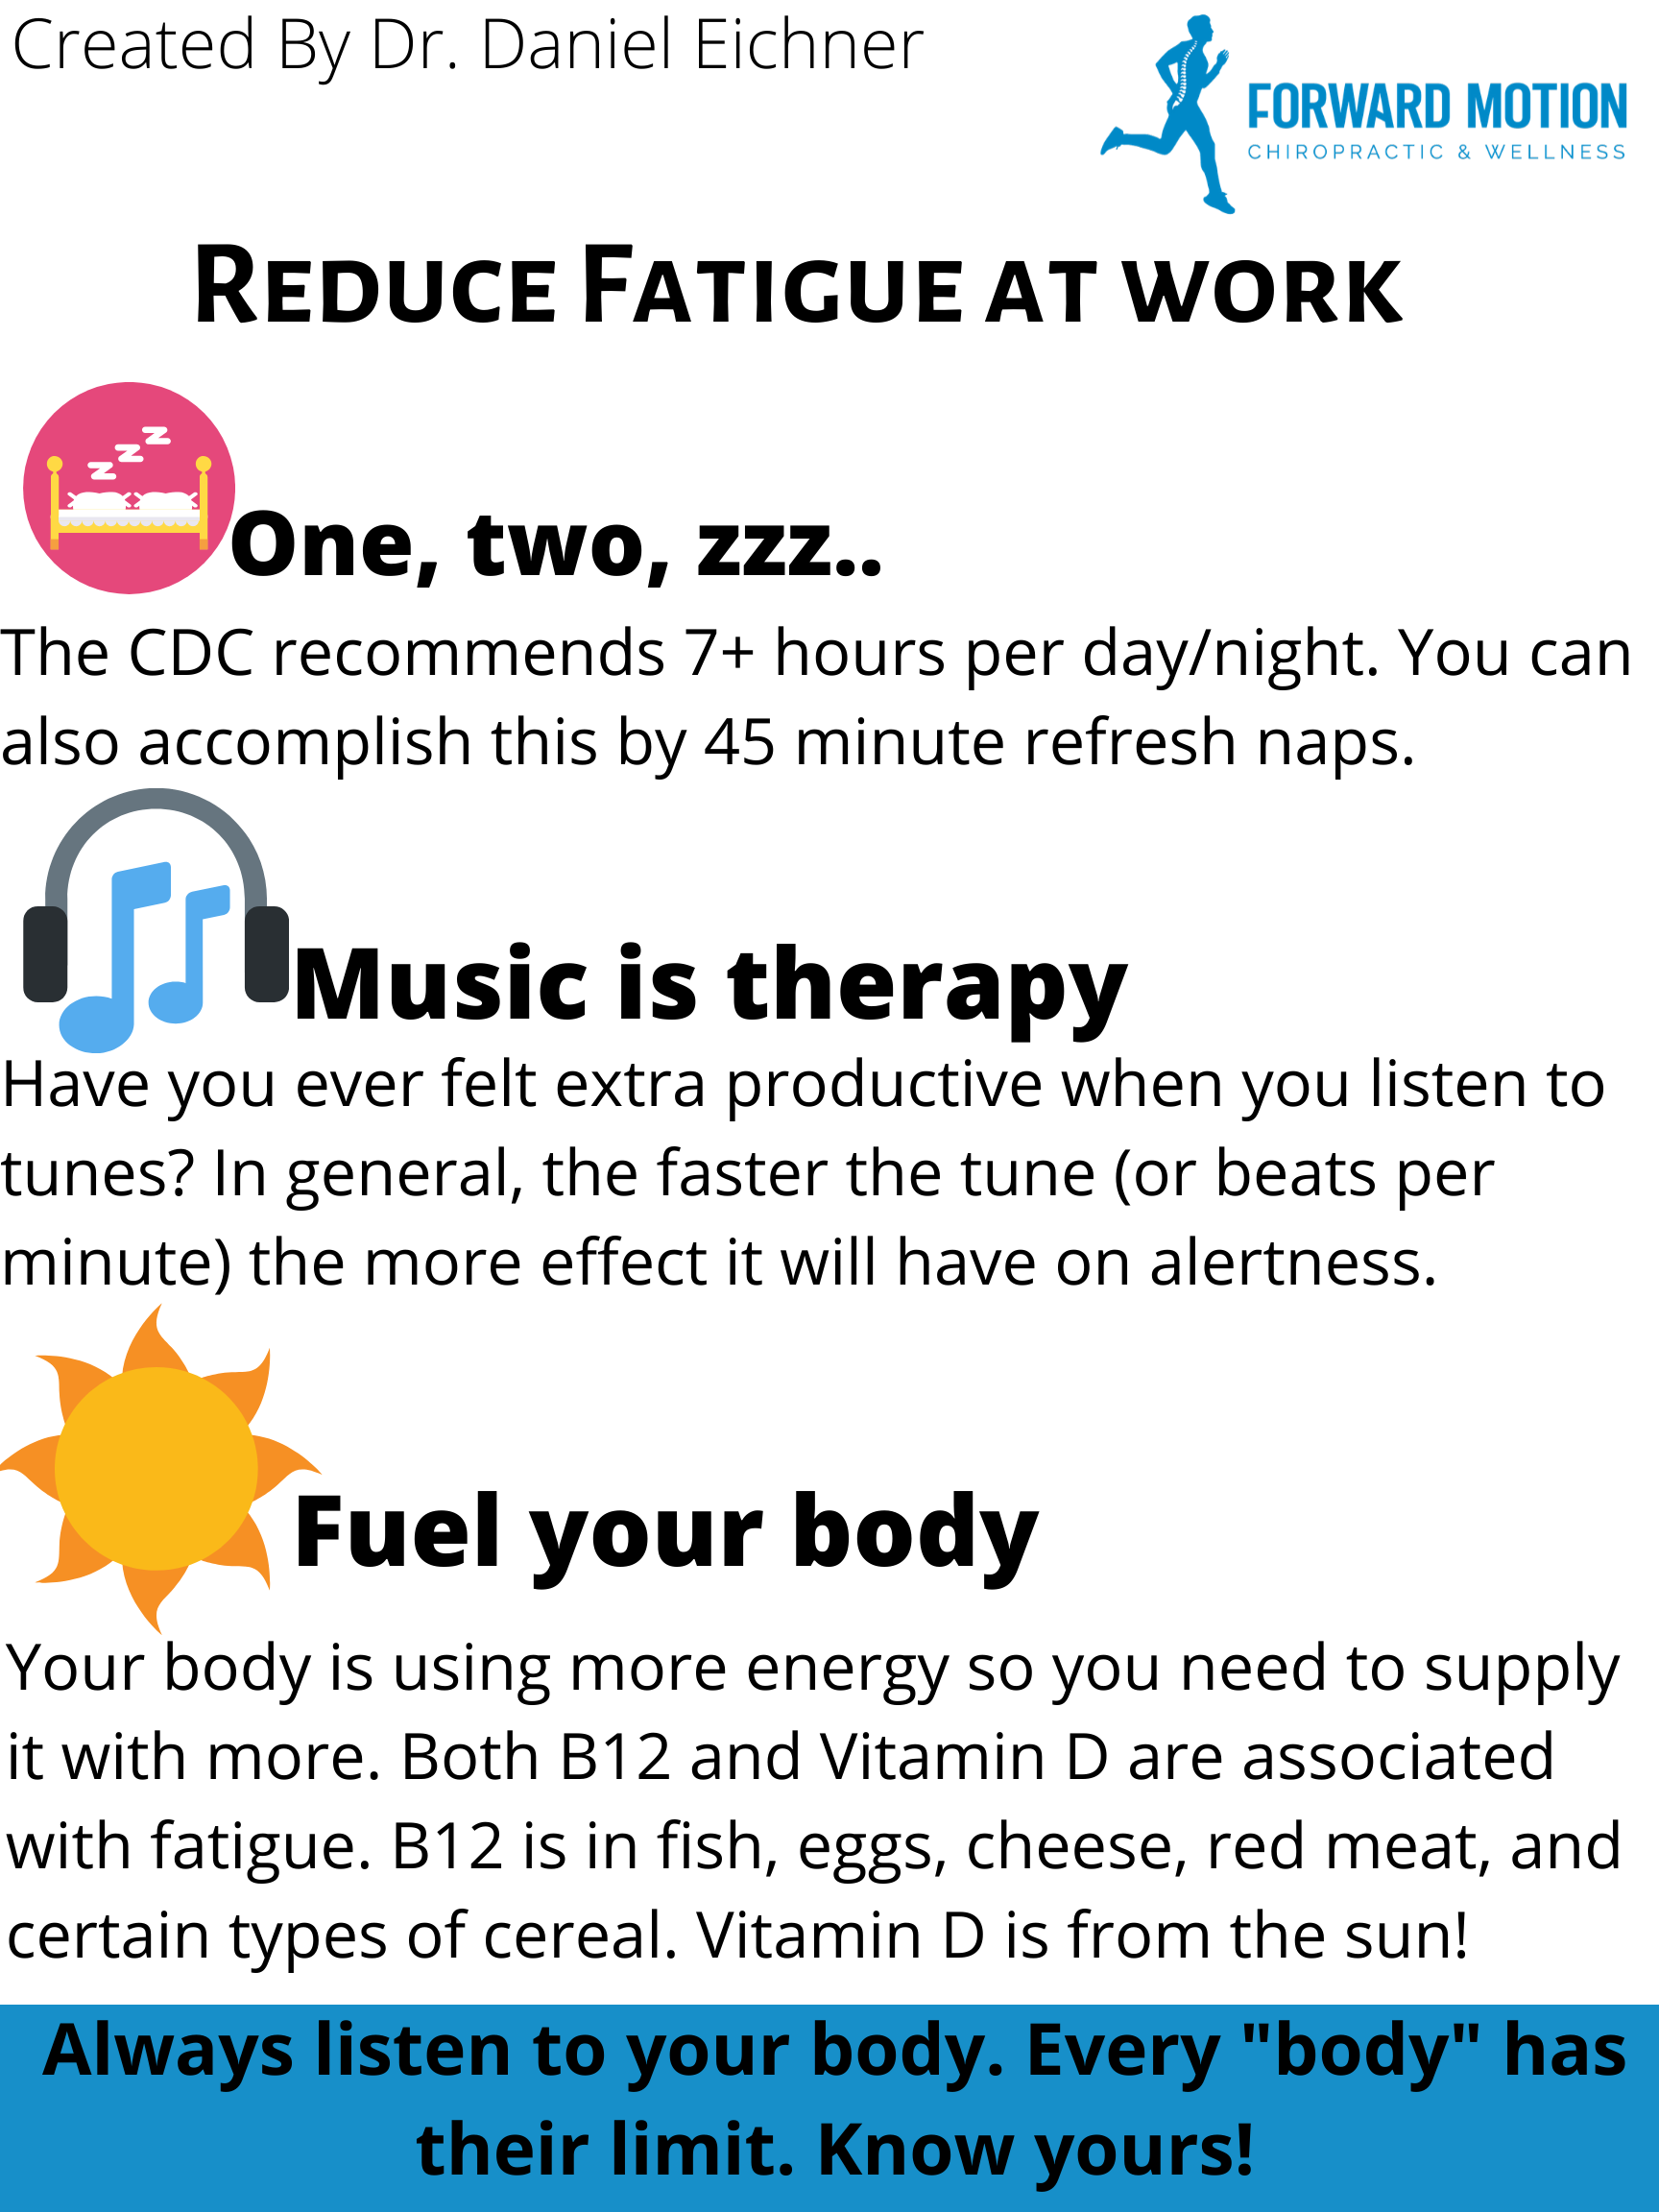 Reduce Fatigue at Work